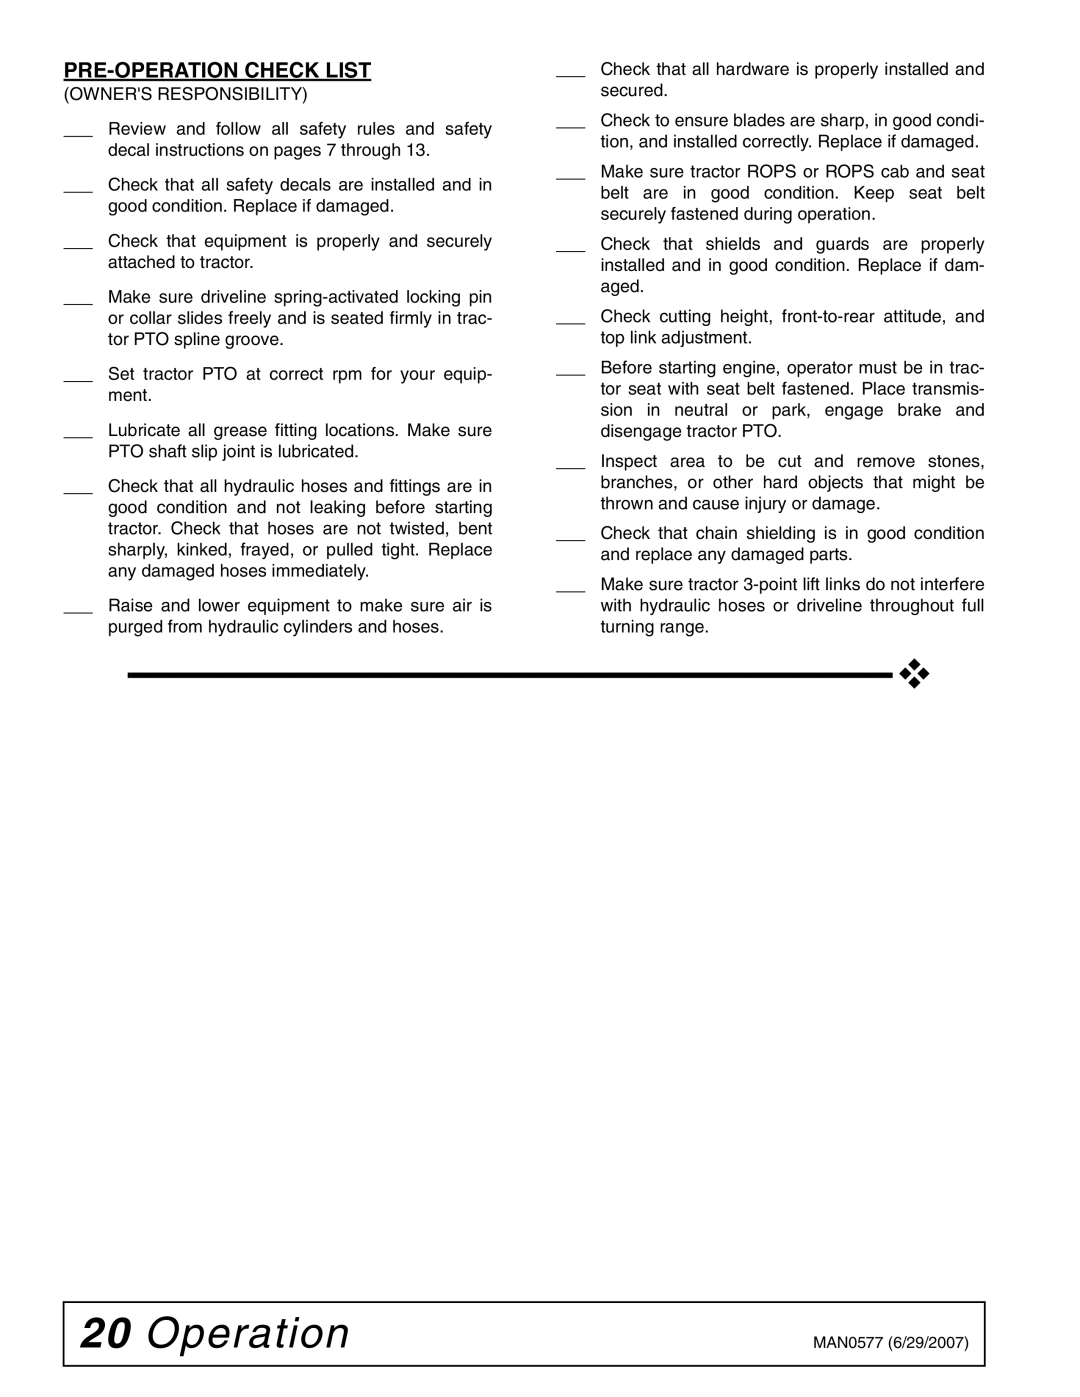 Woods Equipment TS1680Q manual PRE-OPERATION Check List, Owners Responsibility 